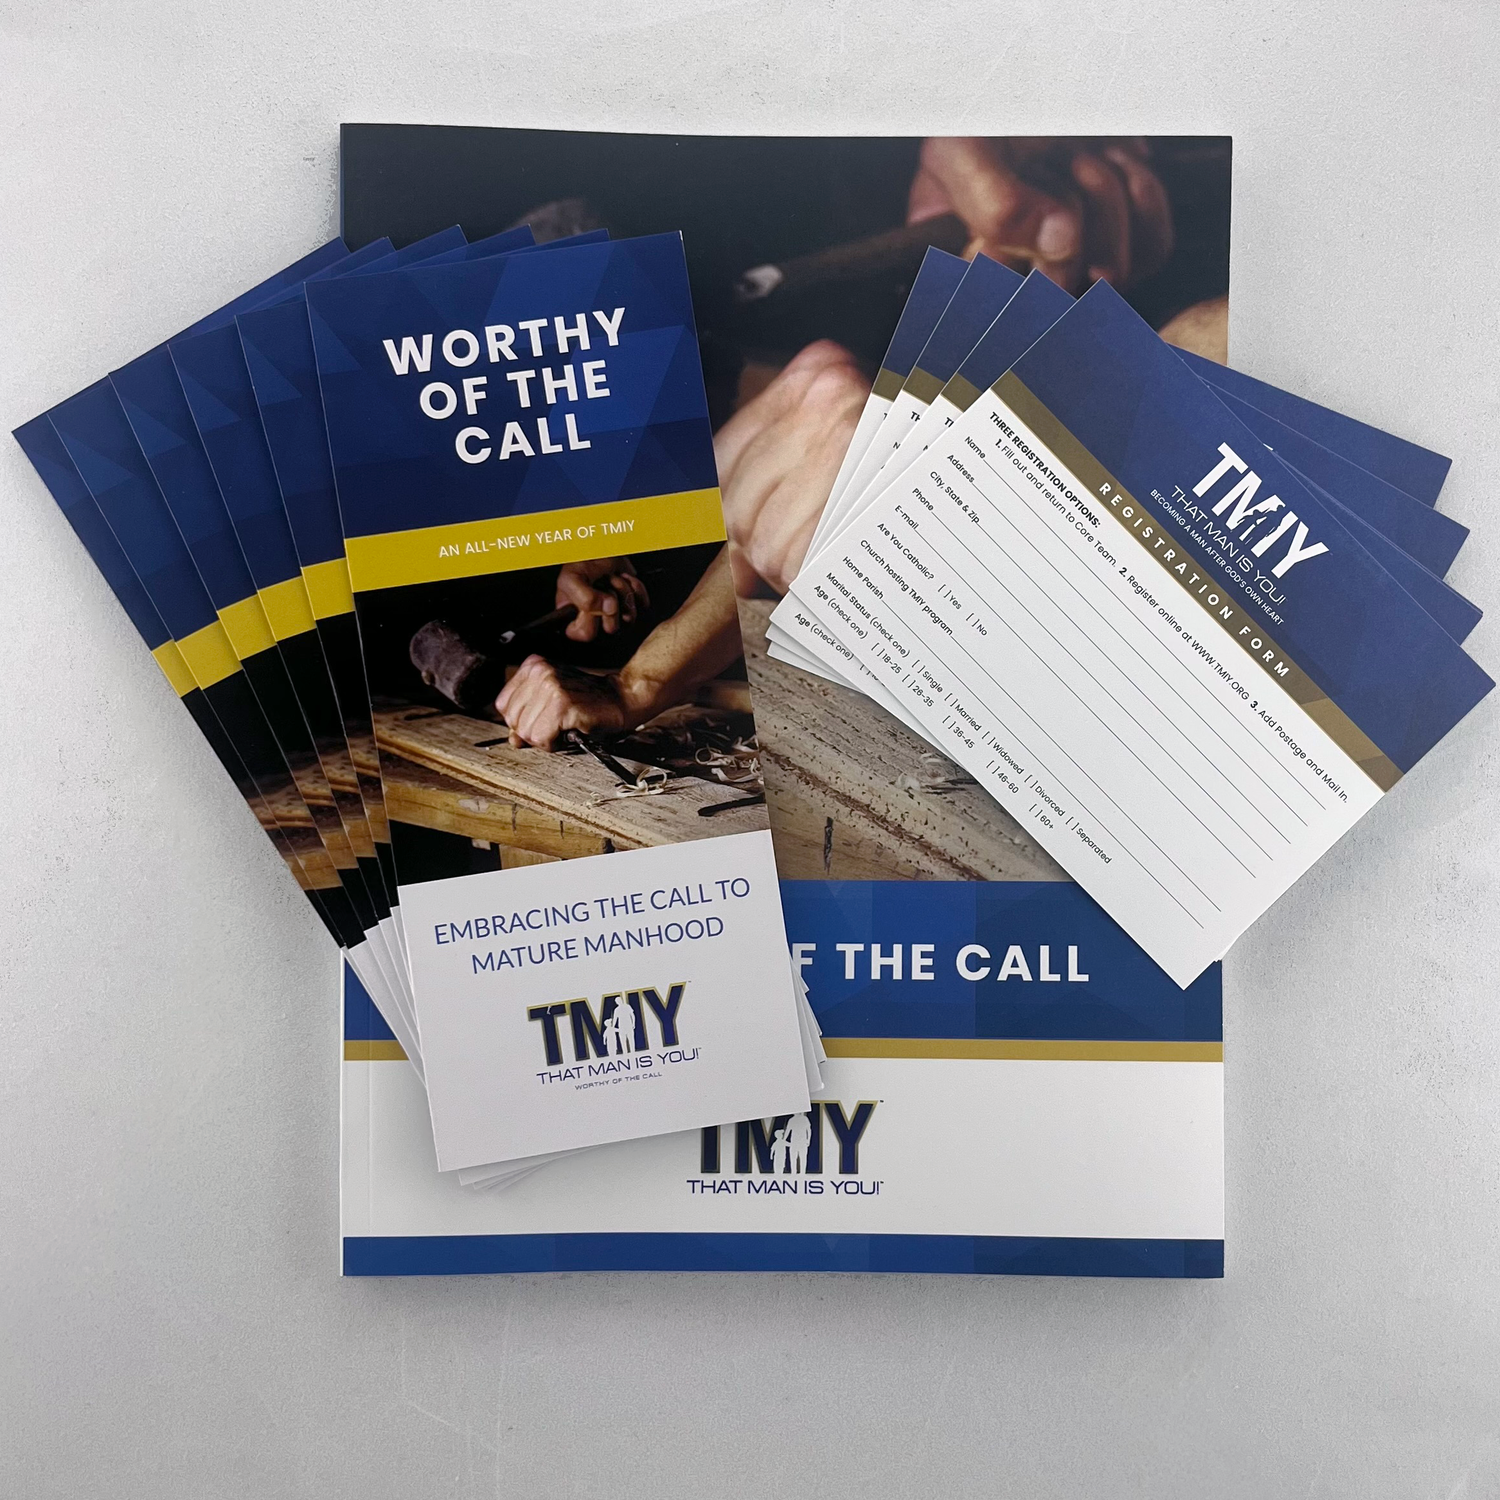 That Man Is You! | Worthy of the Call